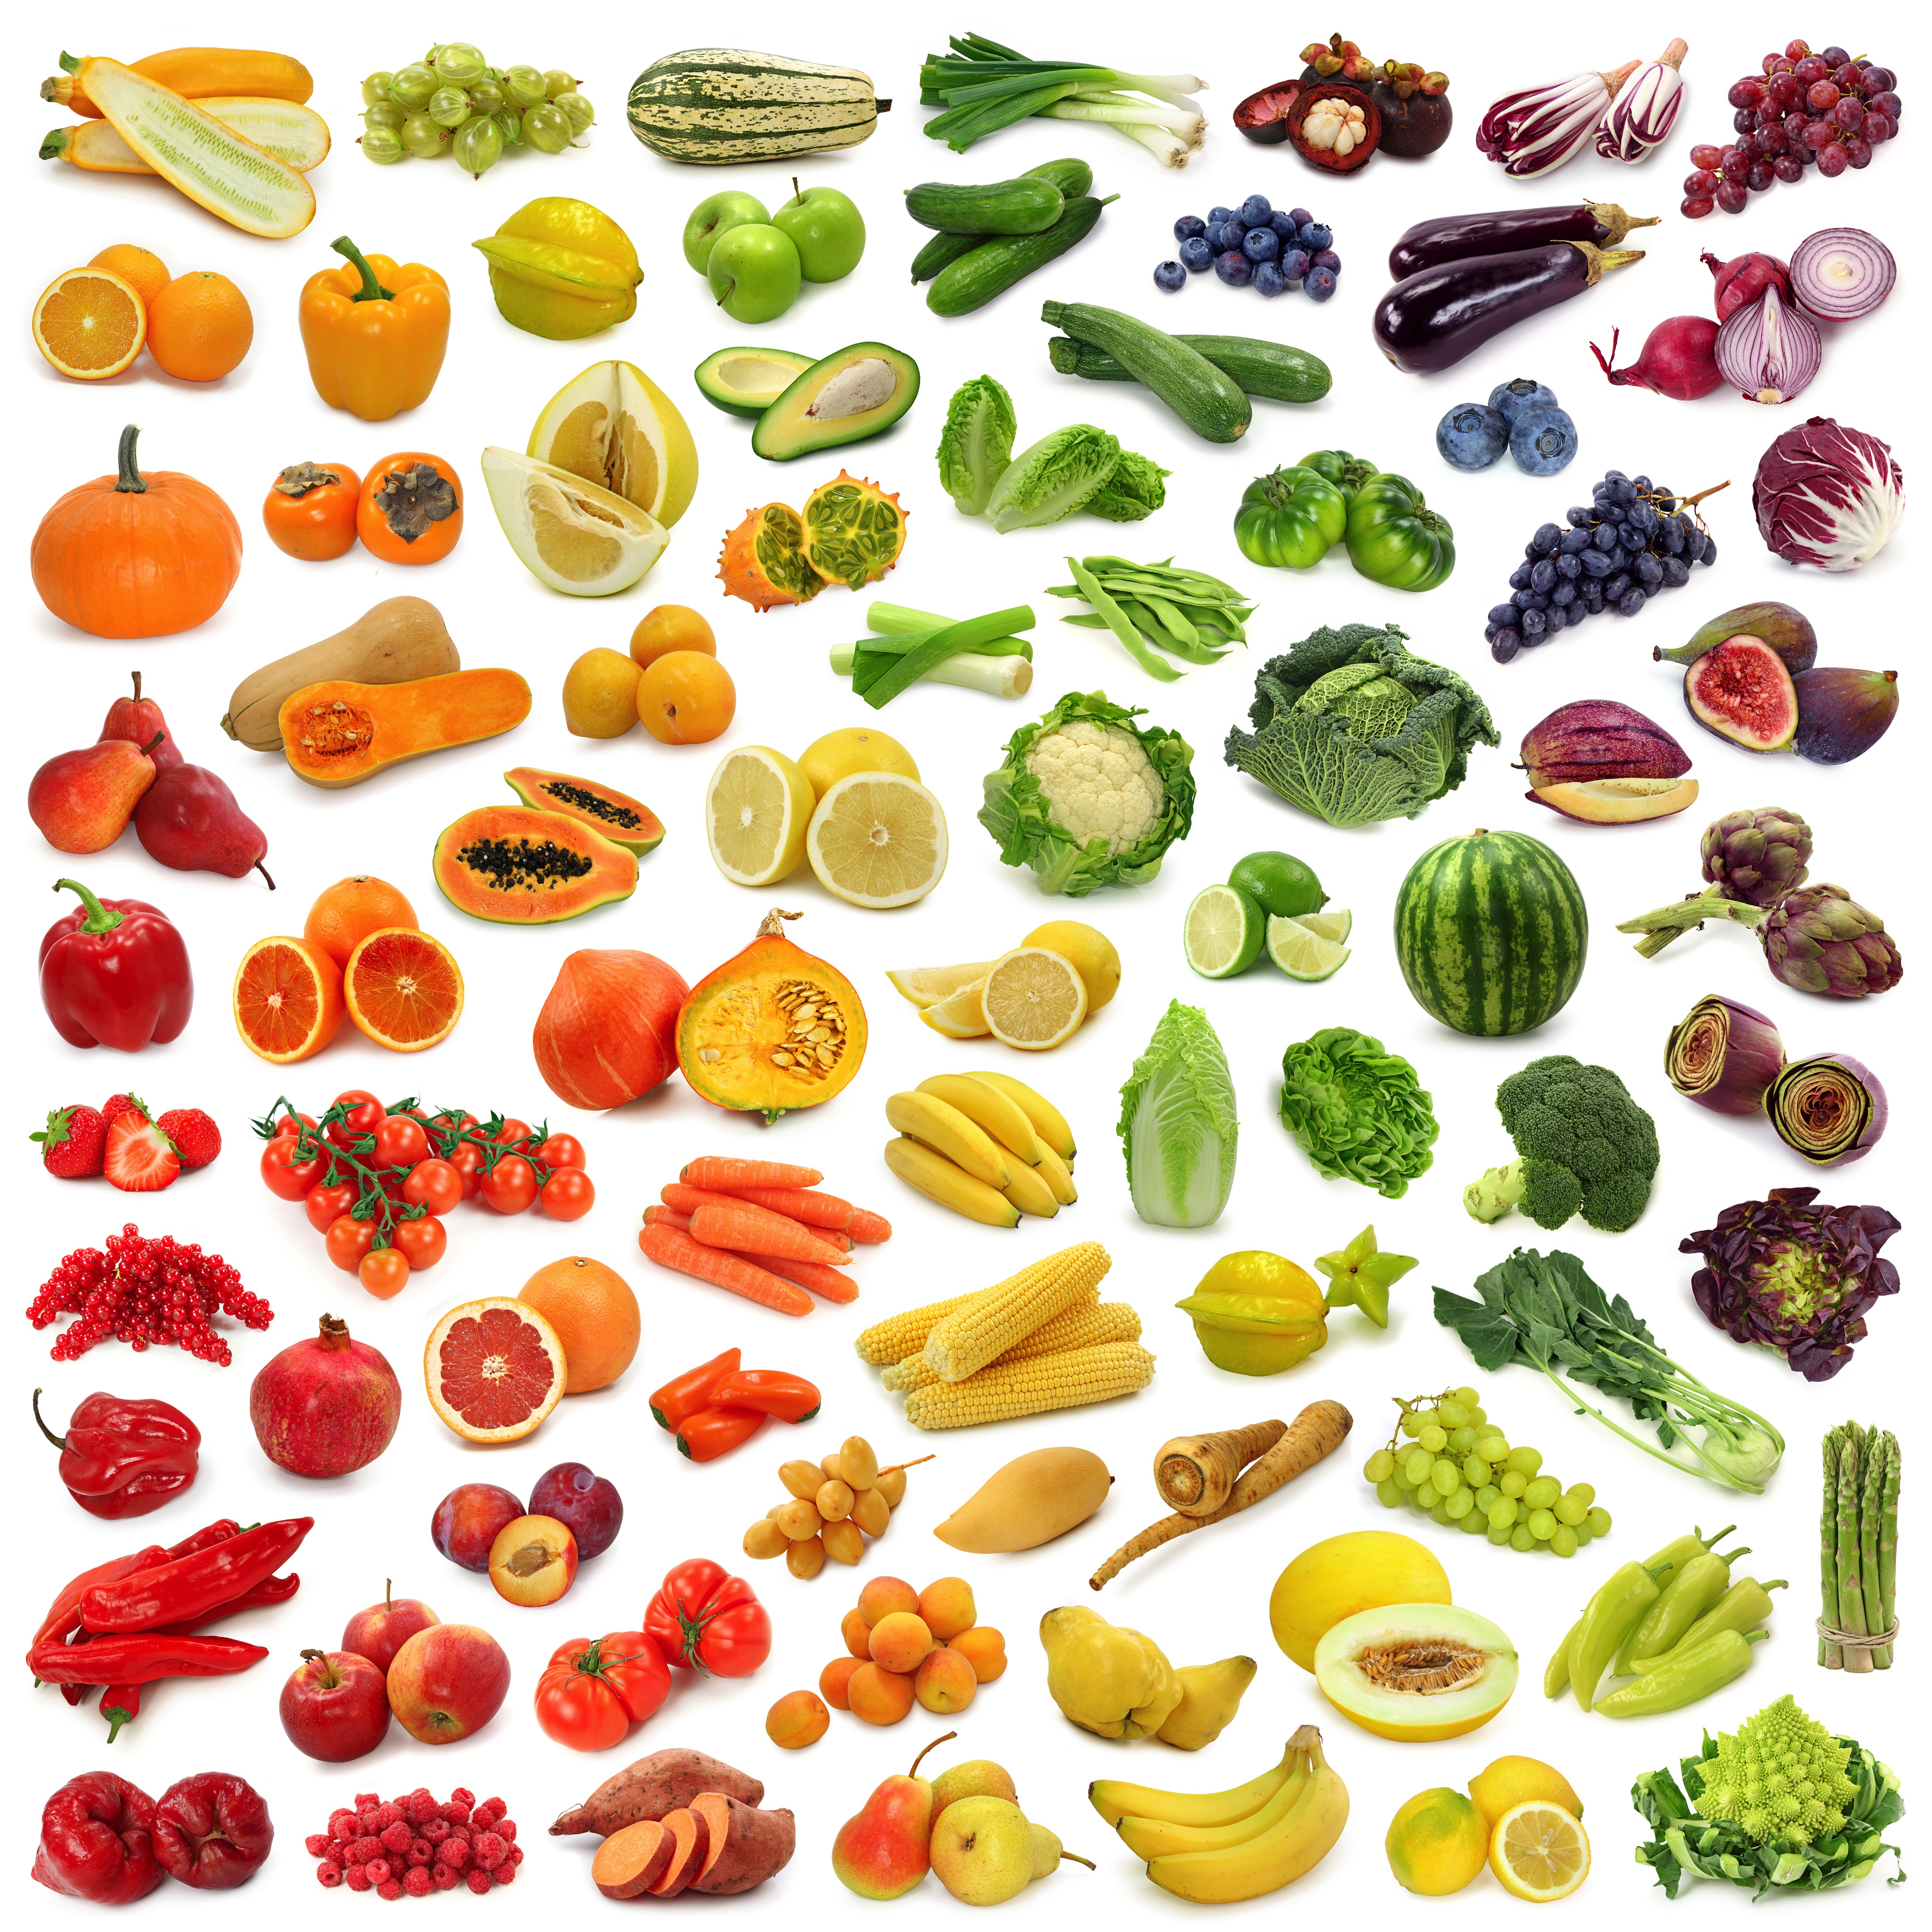 yellow vegetables and fruits